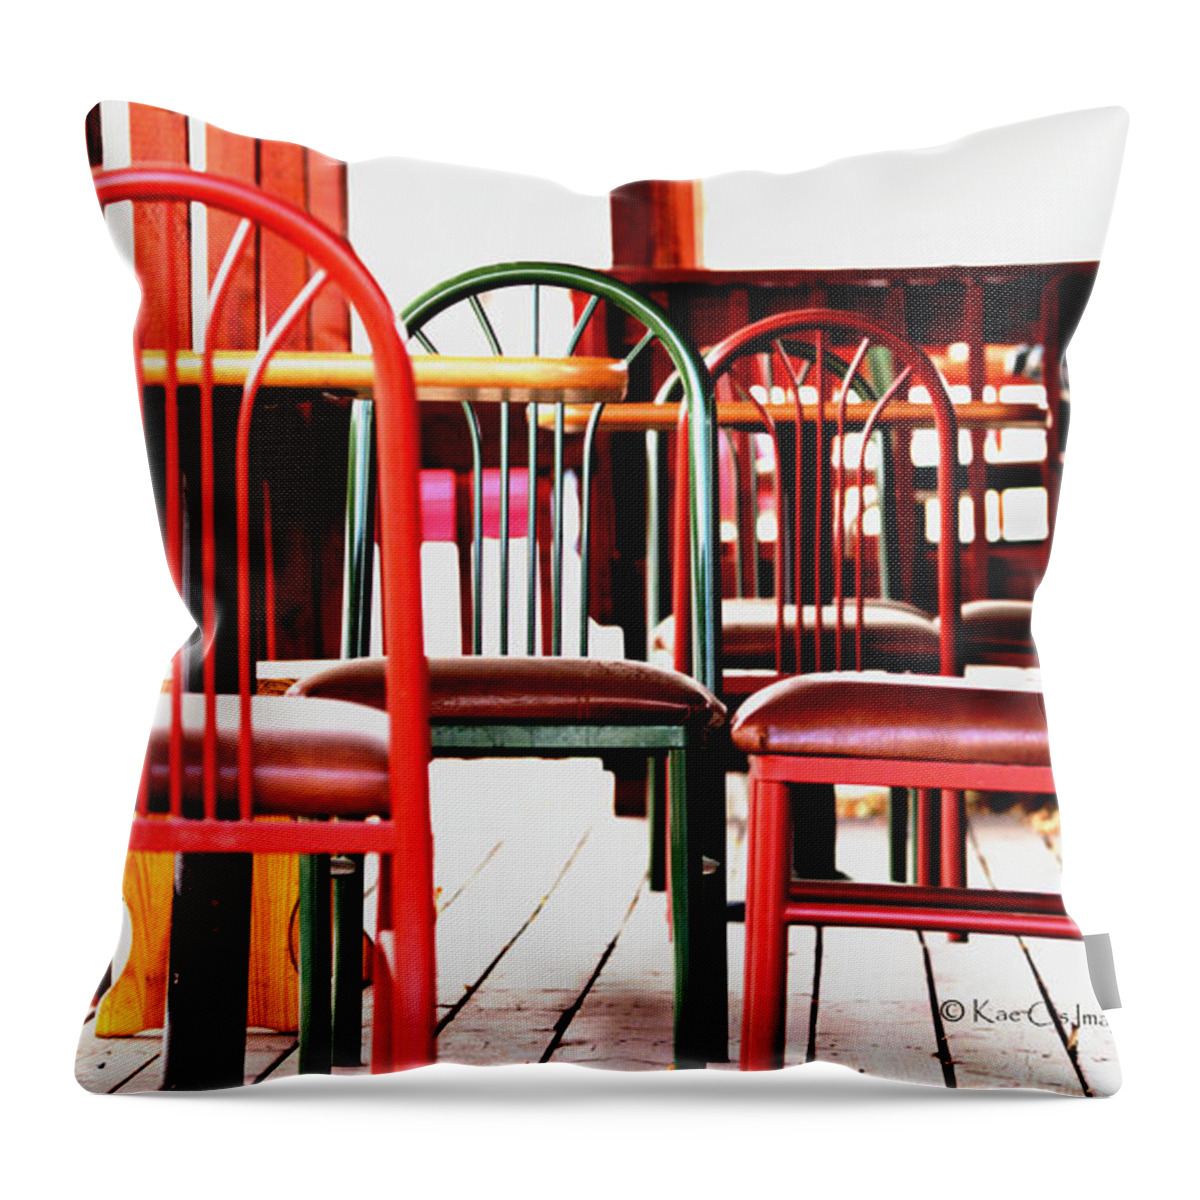 Chairs Throw Pillow featuring the photograph Outdoor Restaurant Seating by Kae Cheatham